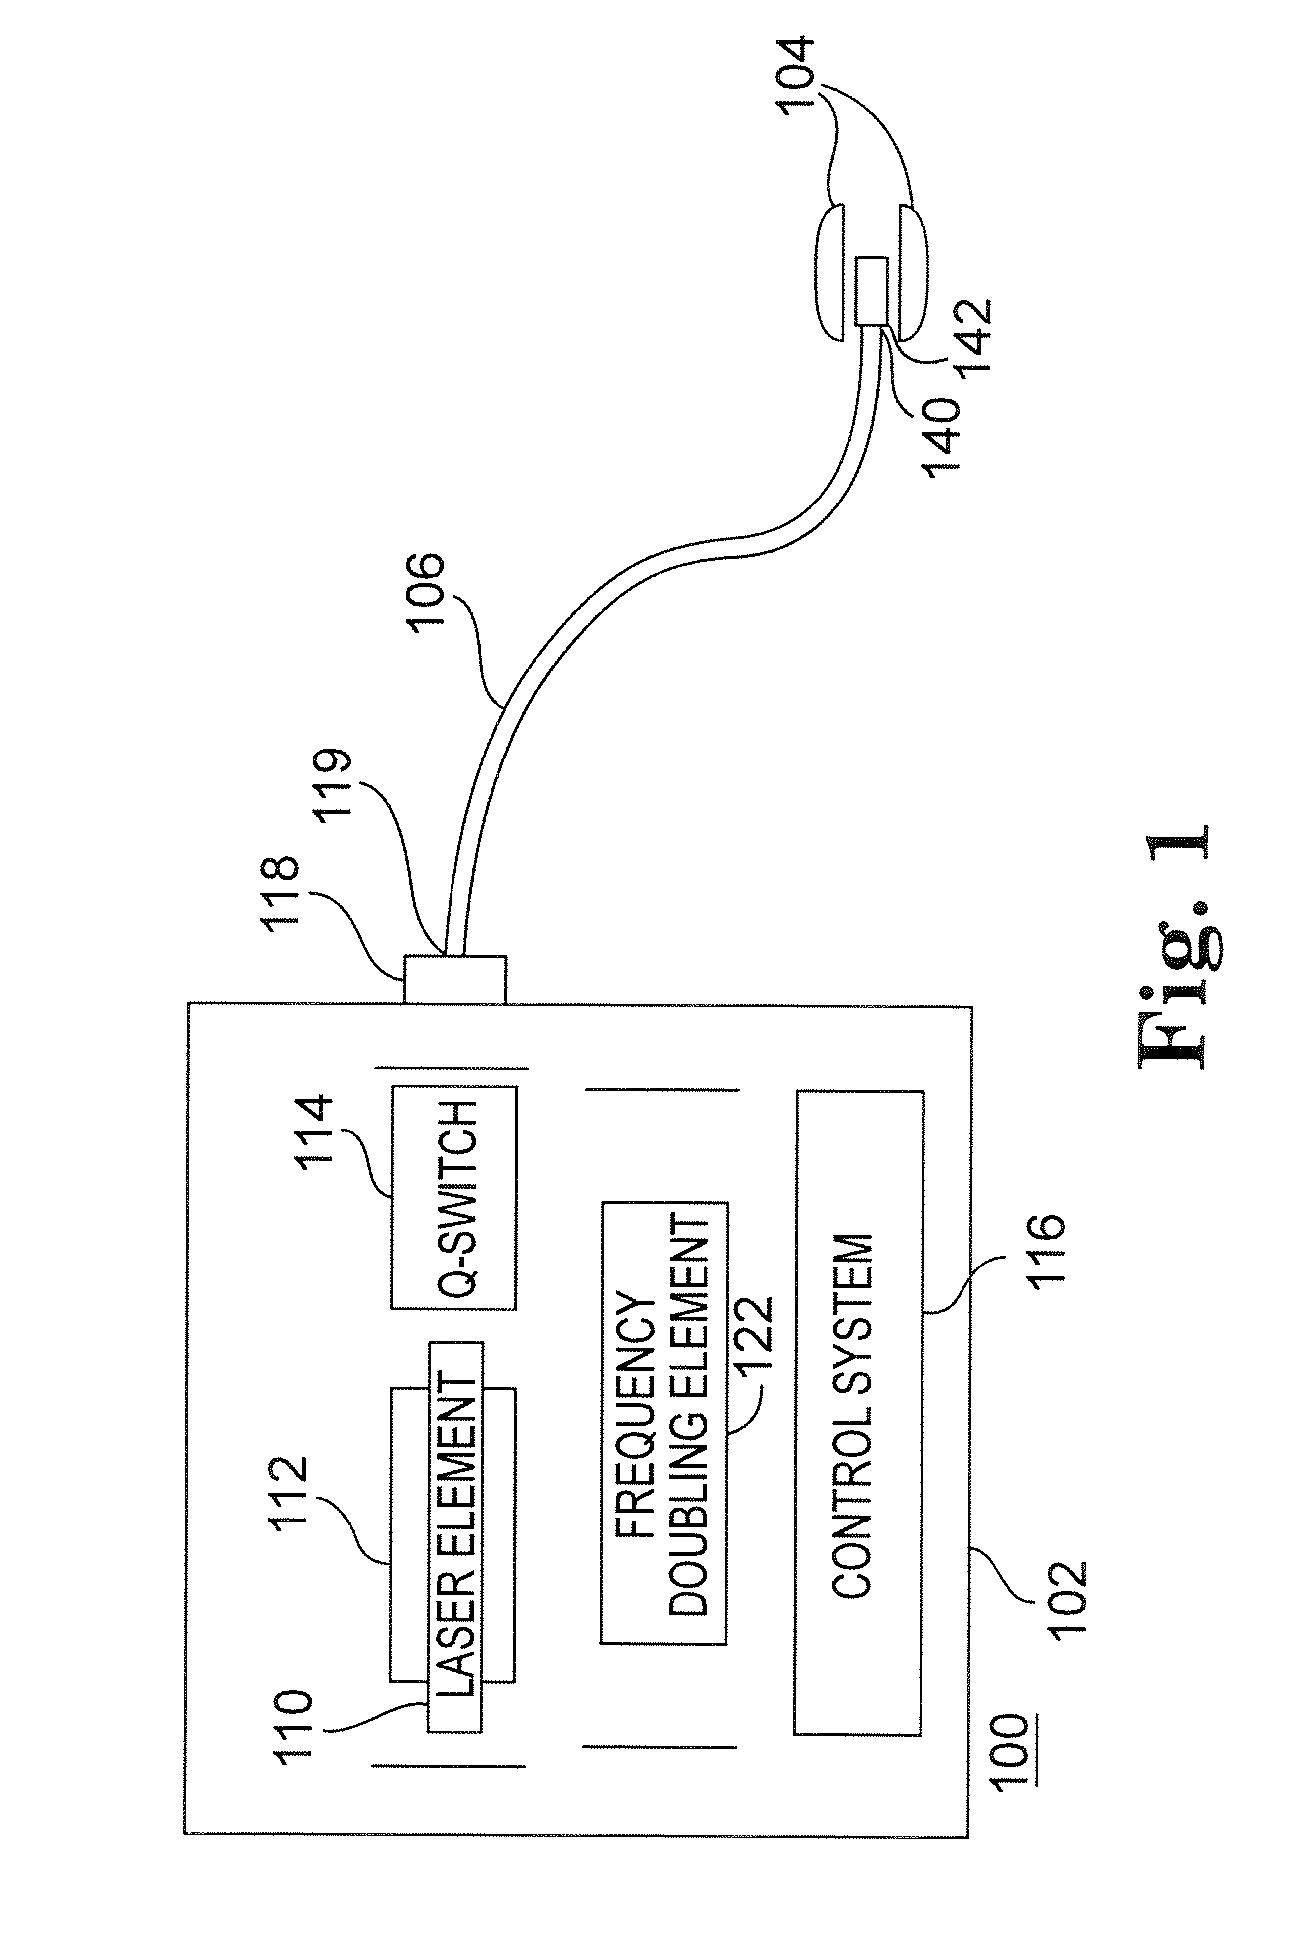 Fiber damage detection and protection device